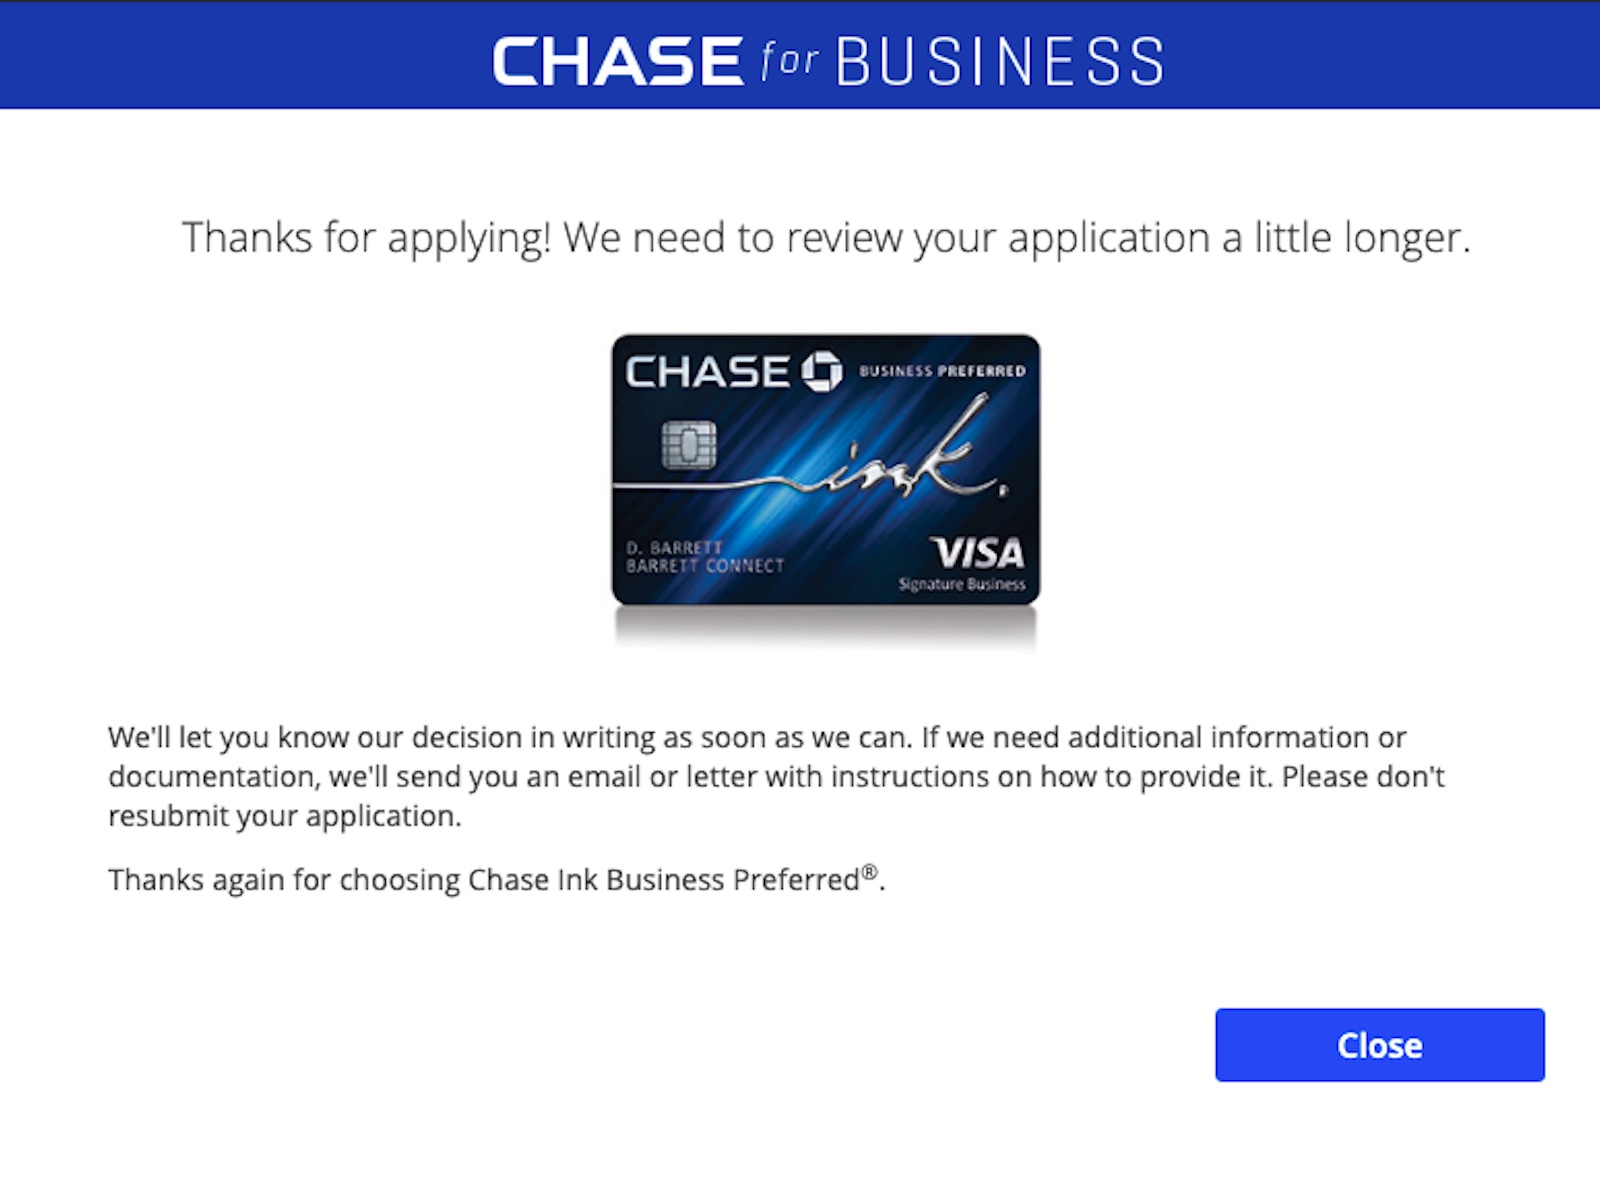 Odd. All My Recent Credit Card Applications "Need More Information"